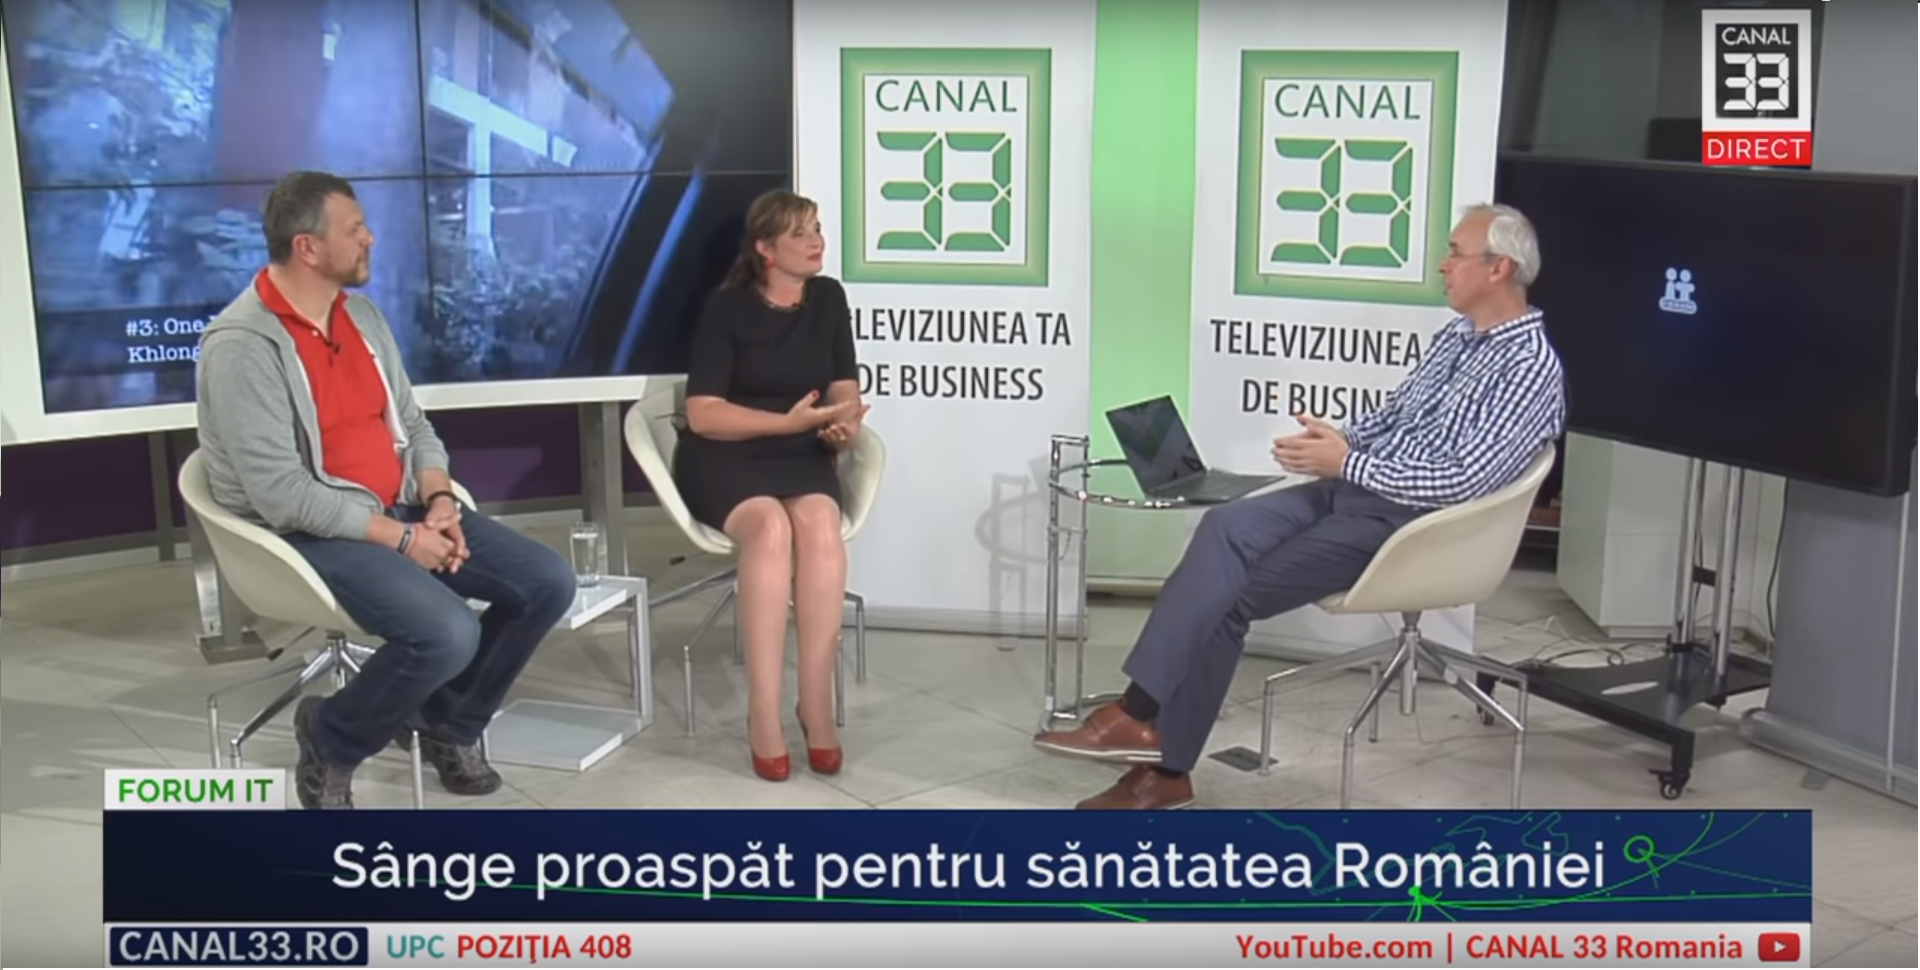 Clusterul ROHEALTH- emisiunea FORUL IT CANAL 33 canal 33.png